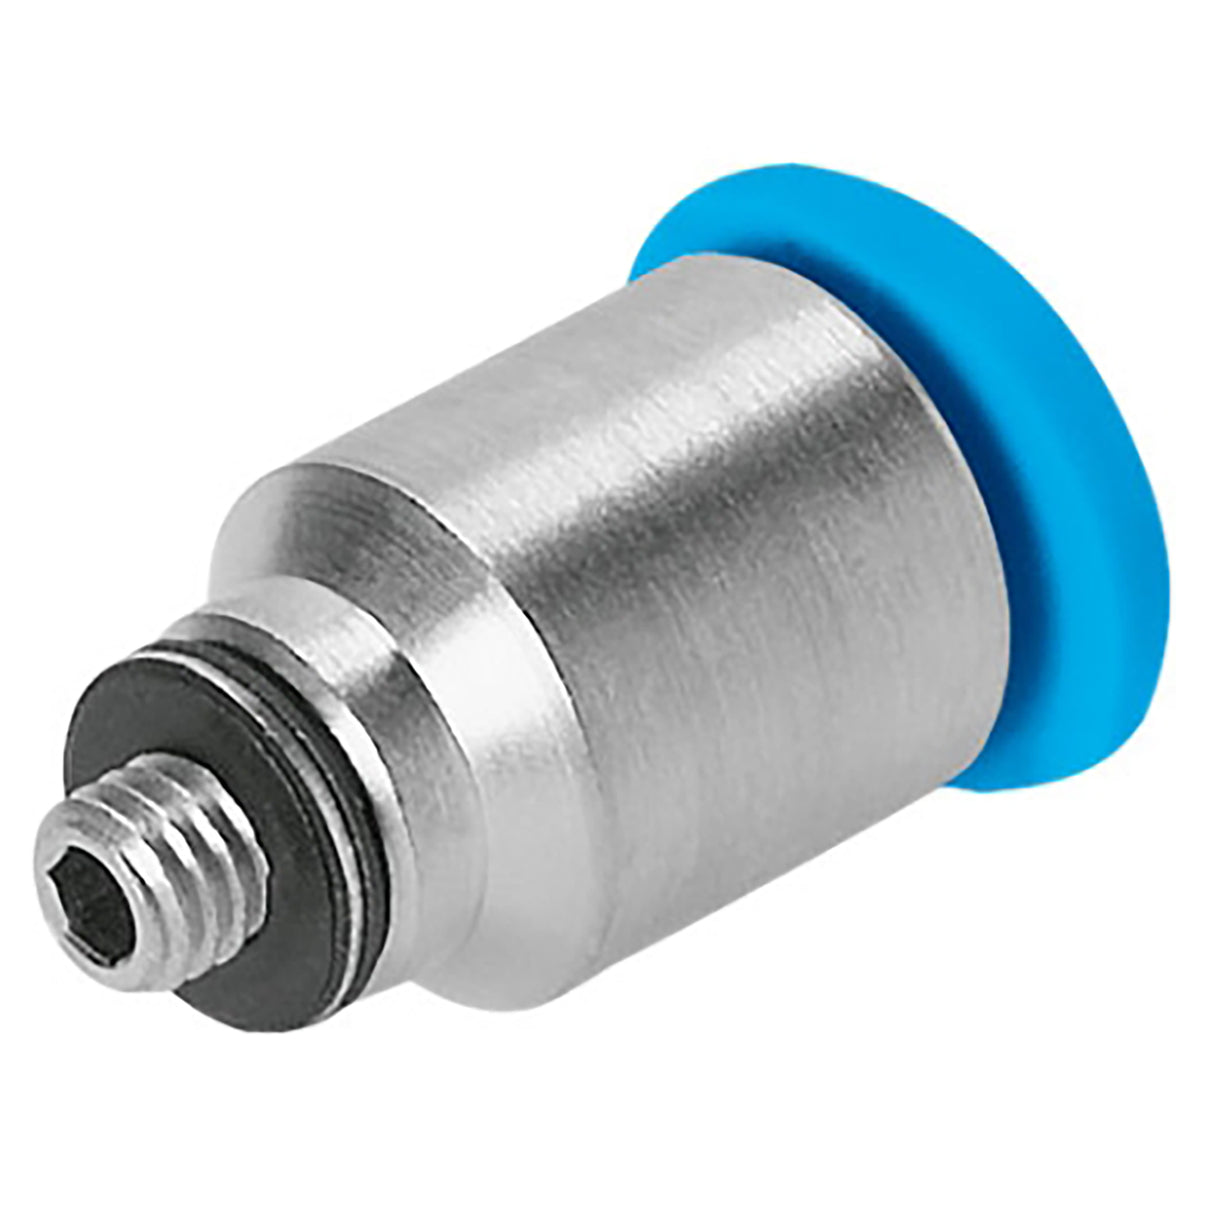 Compressed air coupling Round M5x4